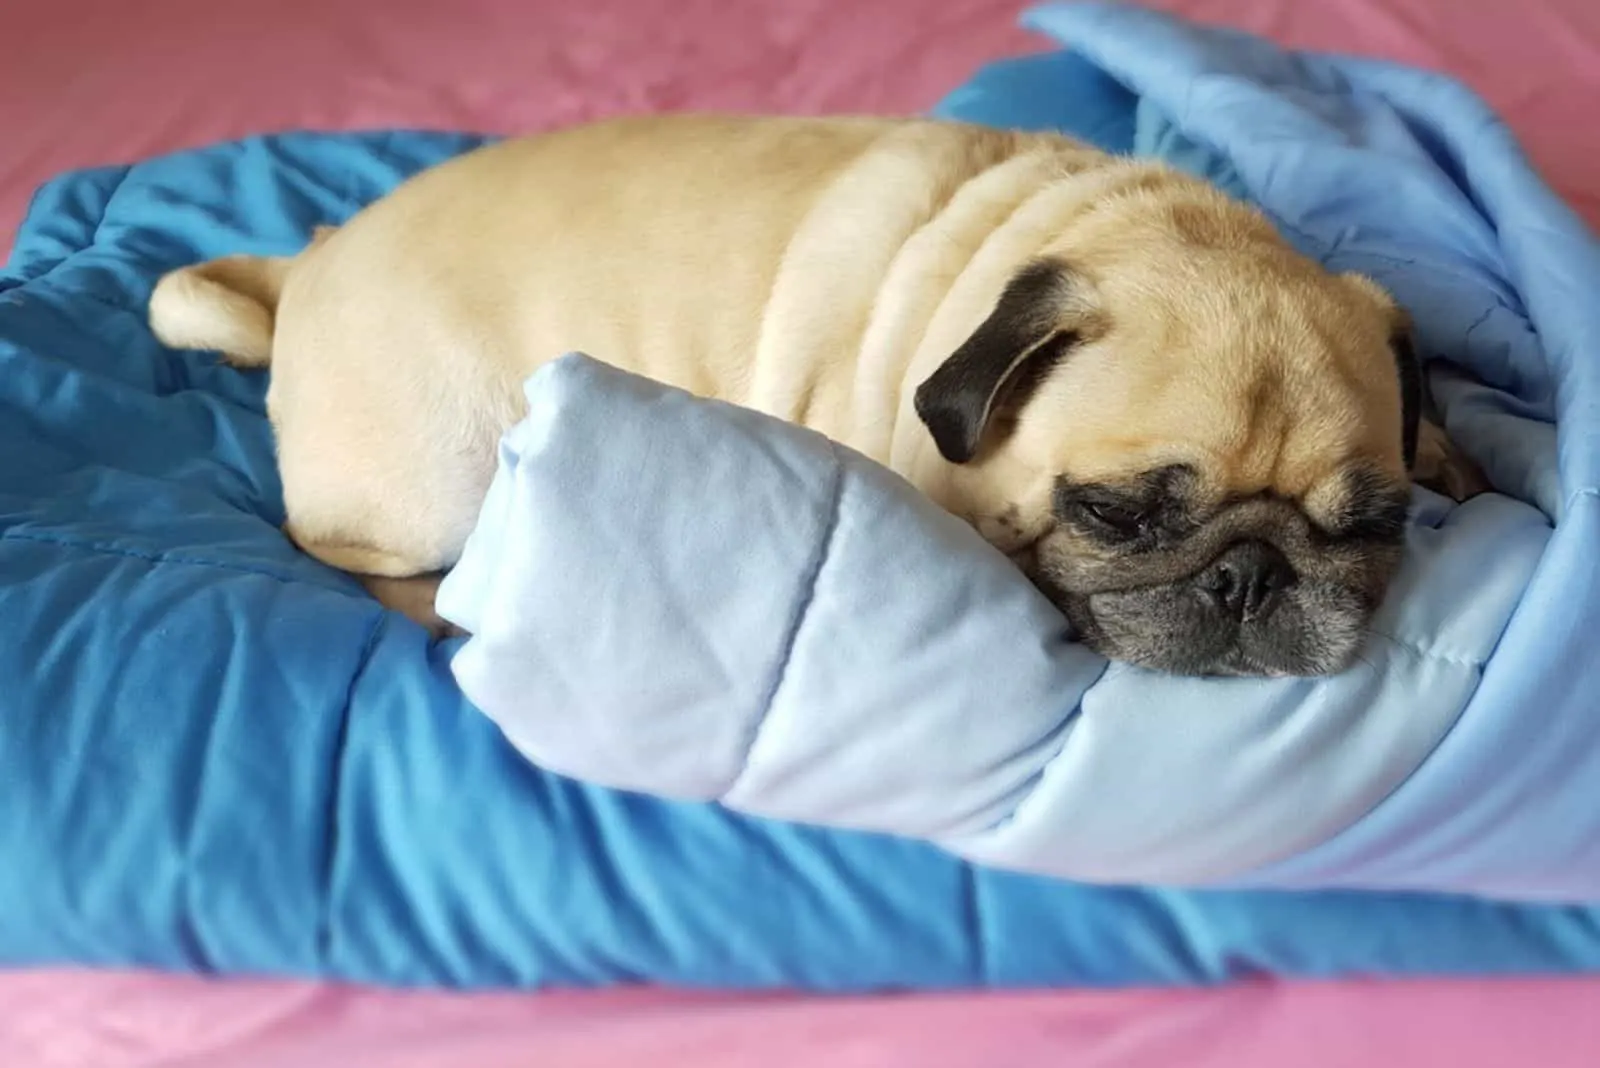 Fat lazy pug dog puppy sleep rest on blanket in the bed